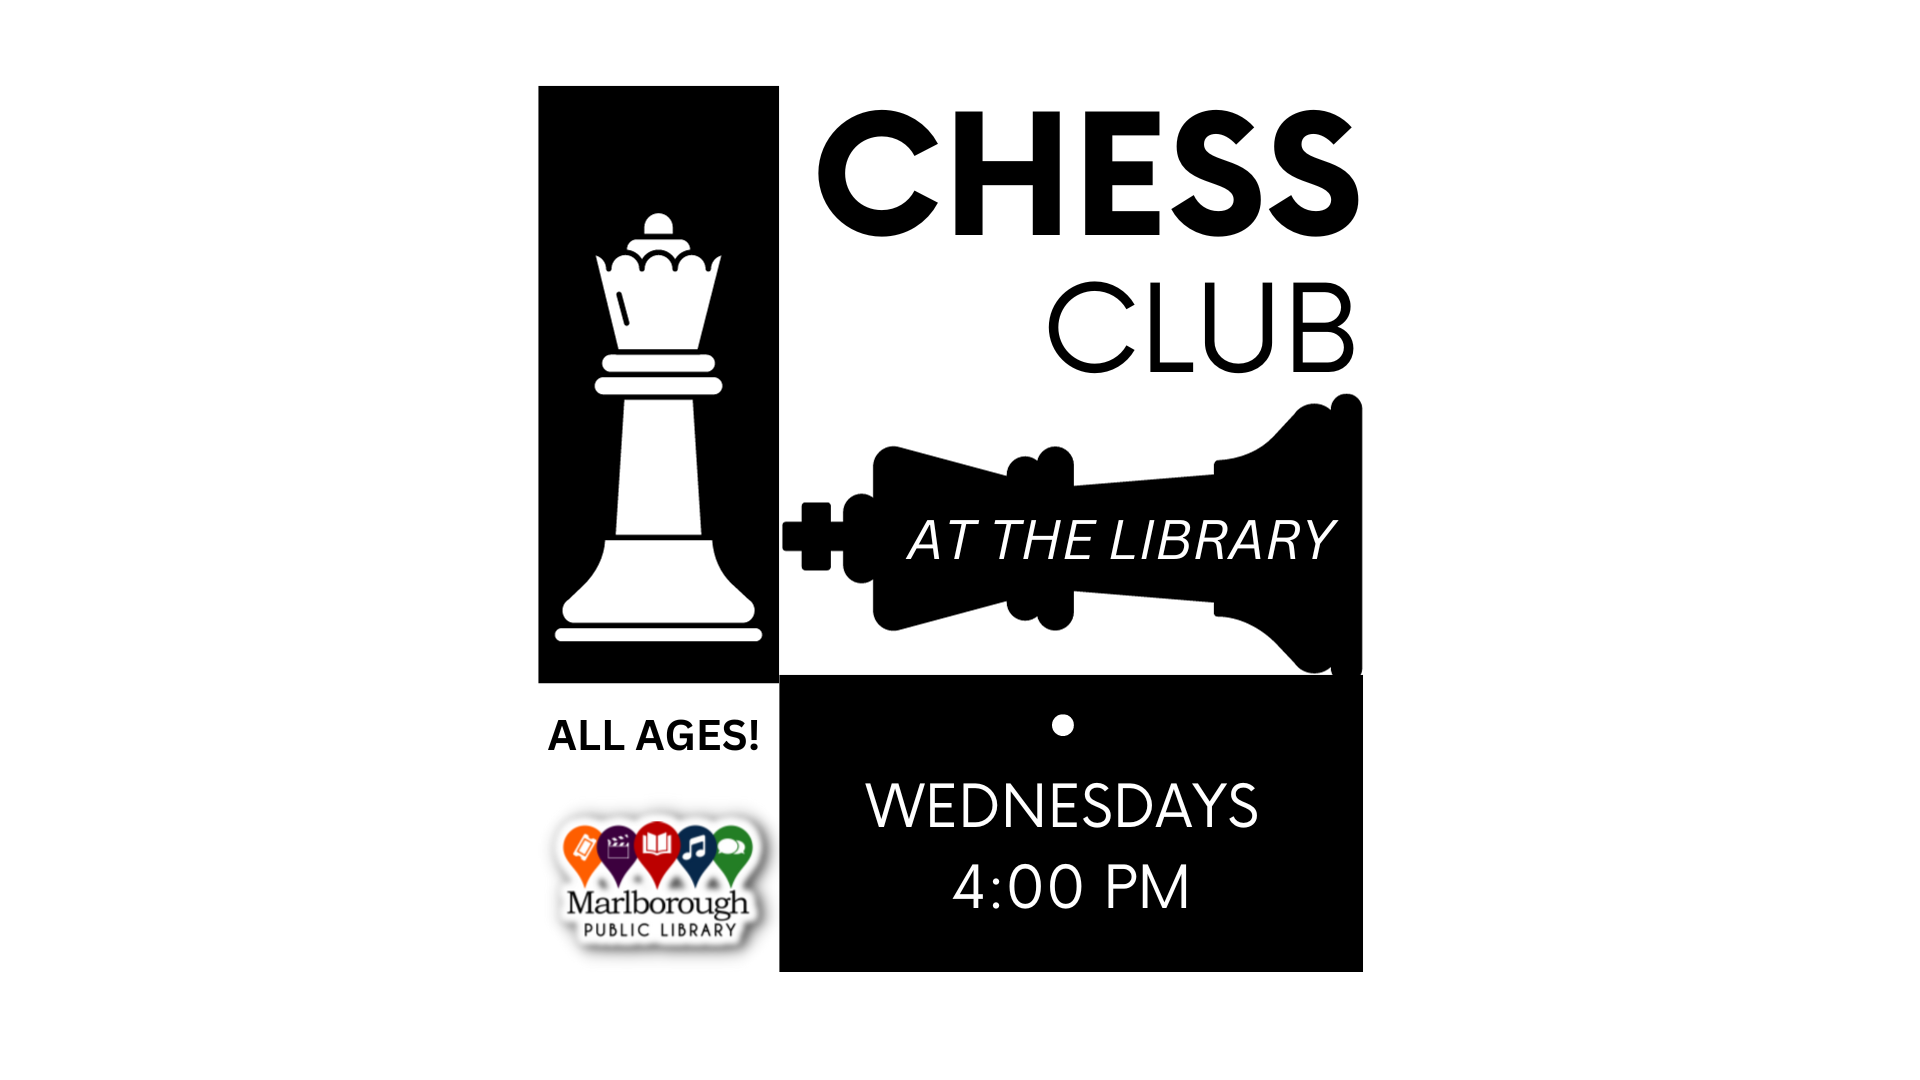 Chess club at Marlborough Public Library happens on Wednesdays at 4:00 PM in Meeting Room 1. All ages and skill levels welcome.